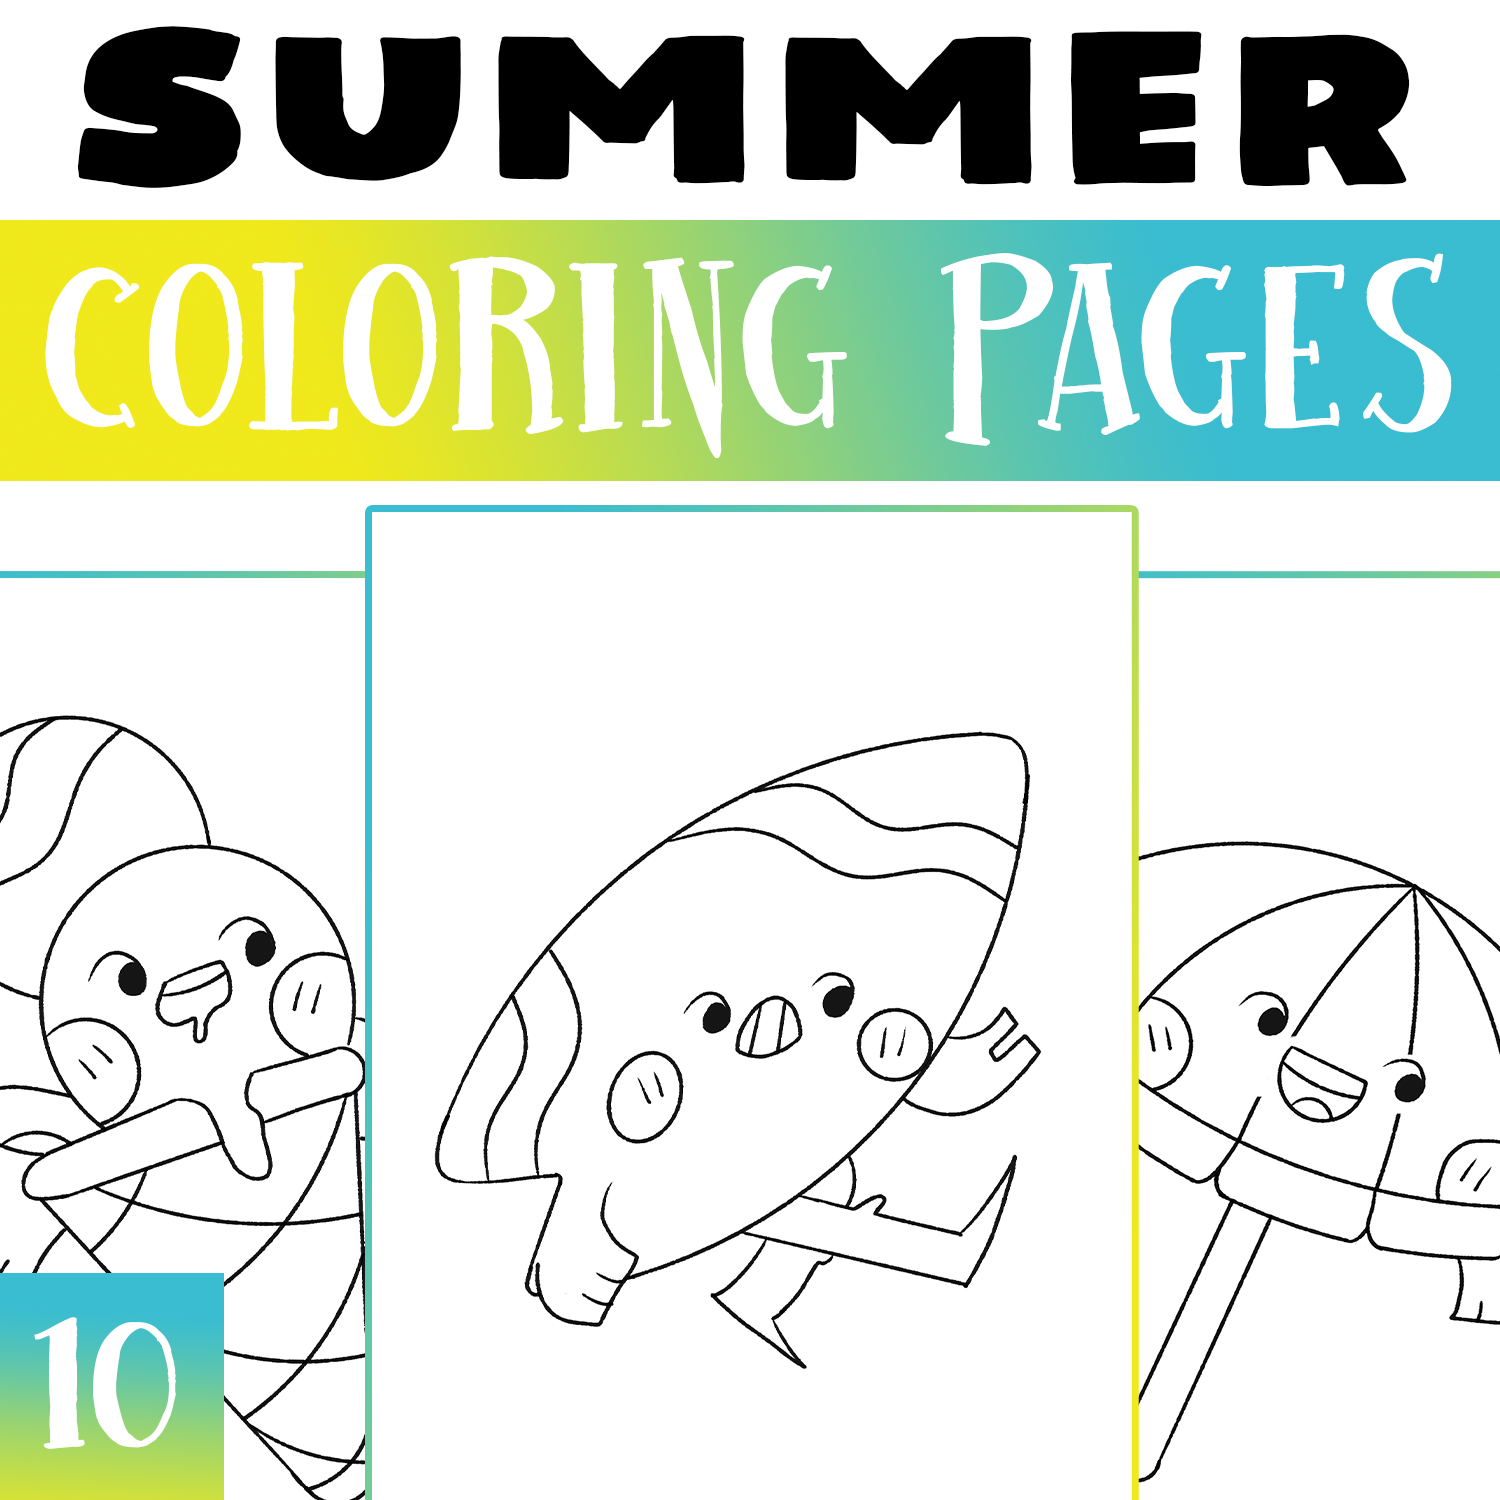 Summer coloring pages end of the year coloring sheet activity morning work made by teachers